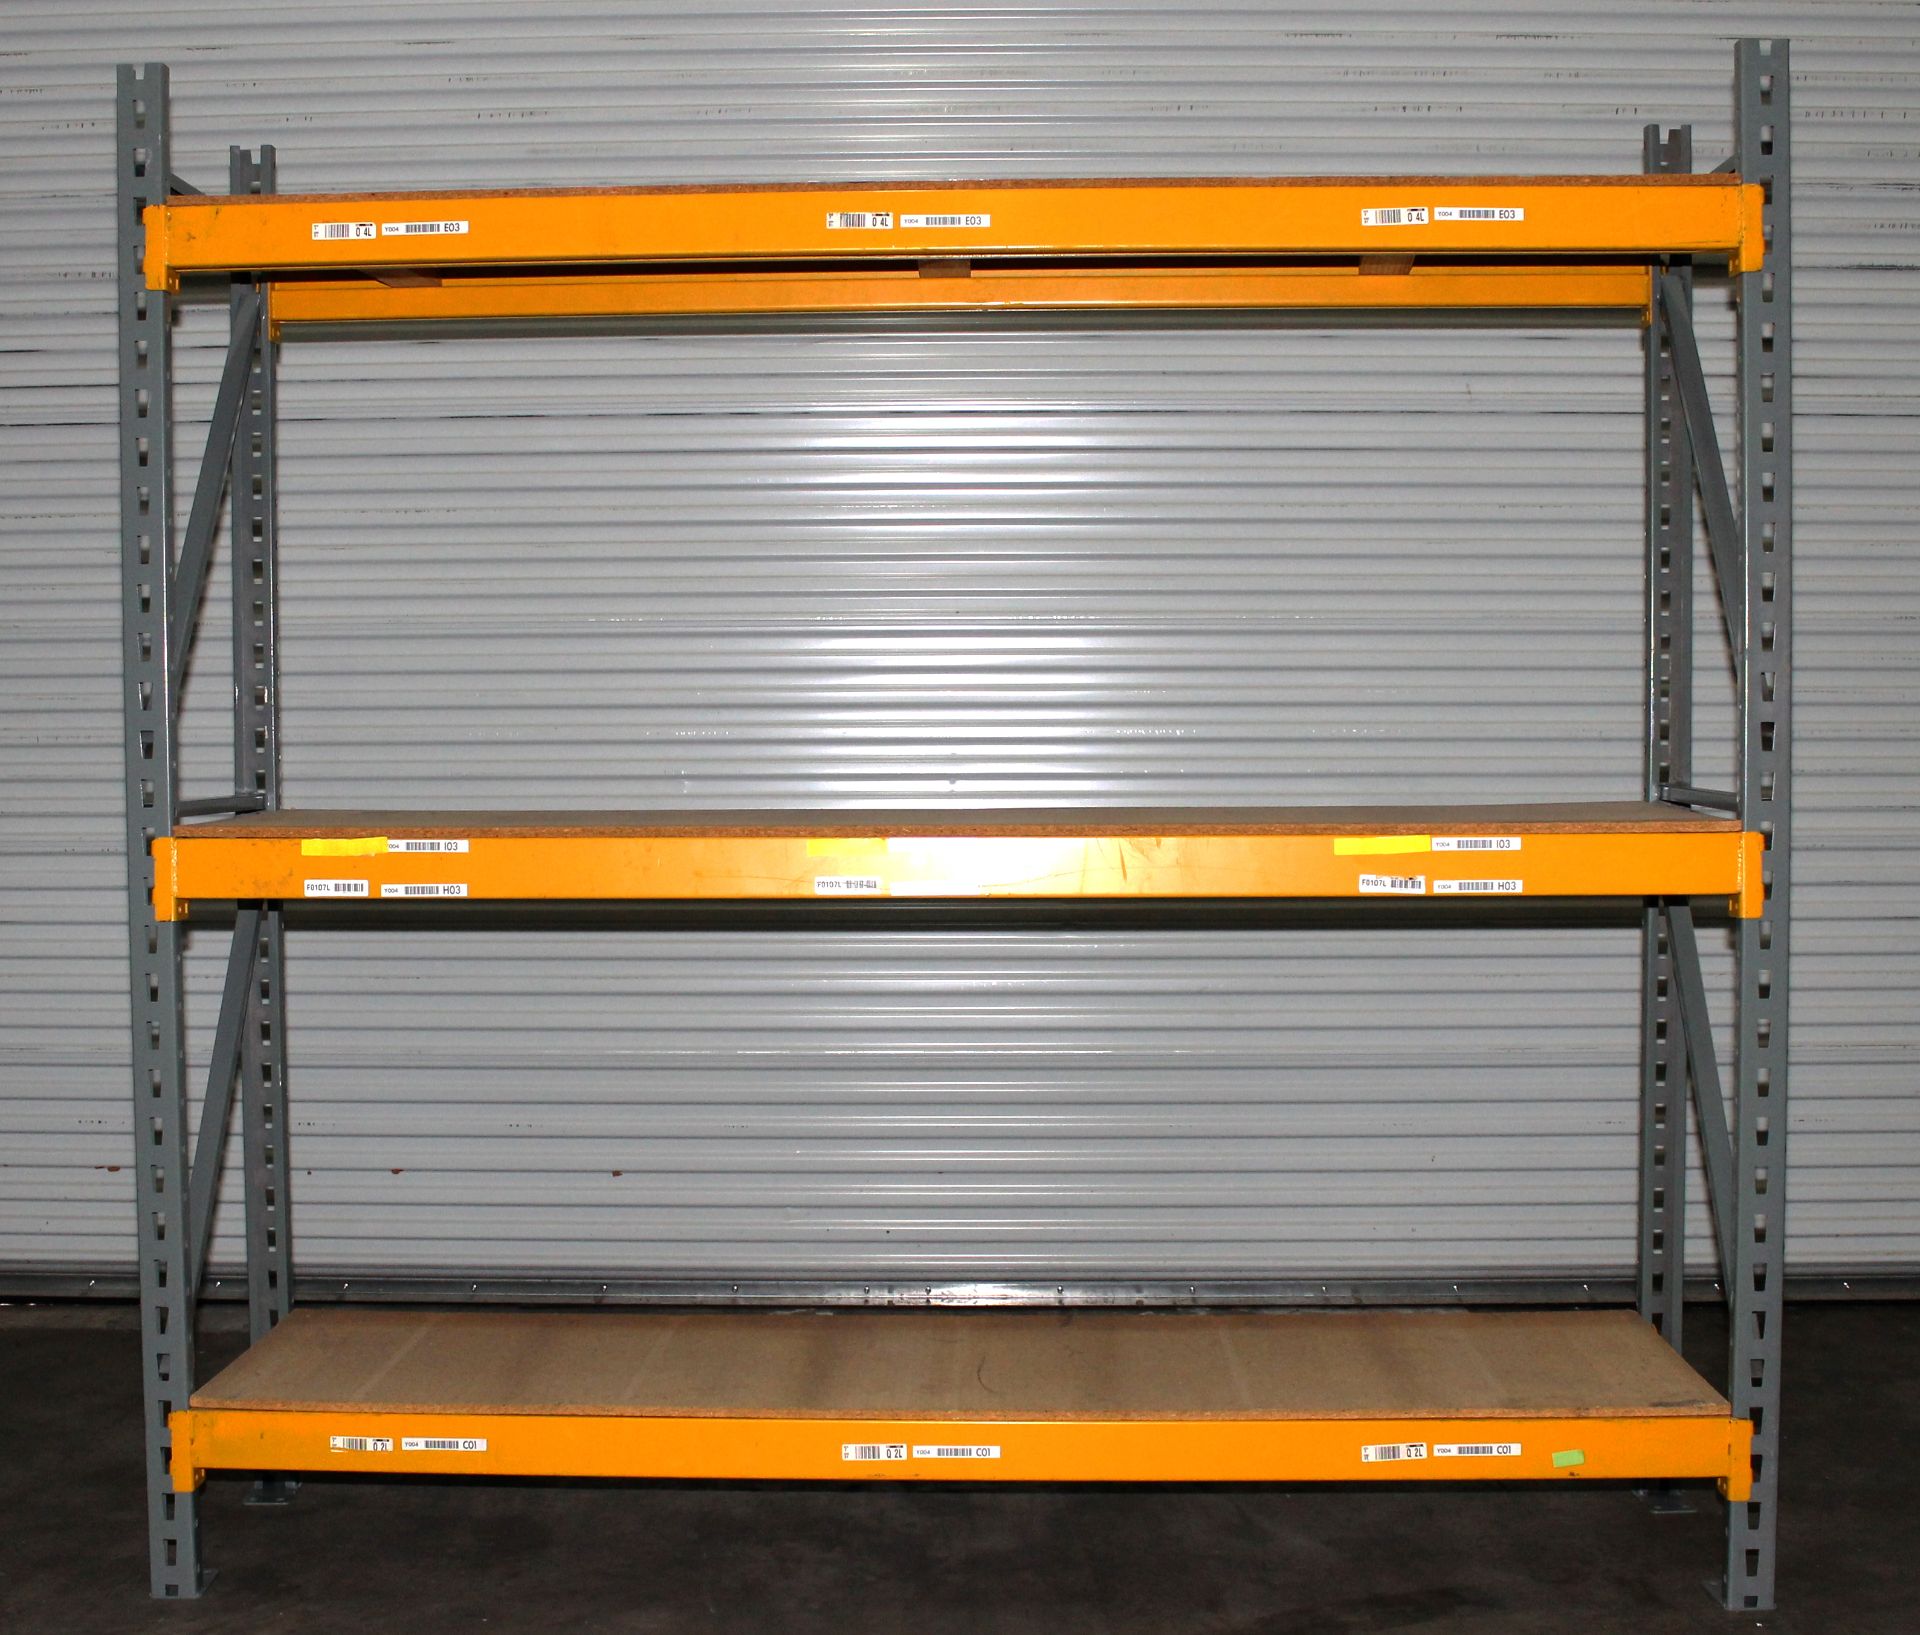 30 SECTIONS OF 96"H X 24"D X 96"L STOCK ROOM PALLET RACK SHELVING,  TOTAL 30 SECTIONS, 3 ROWS - Image 4 of 5